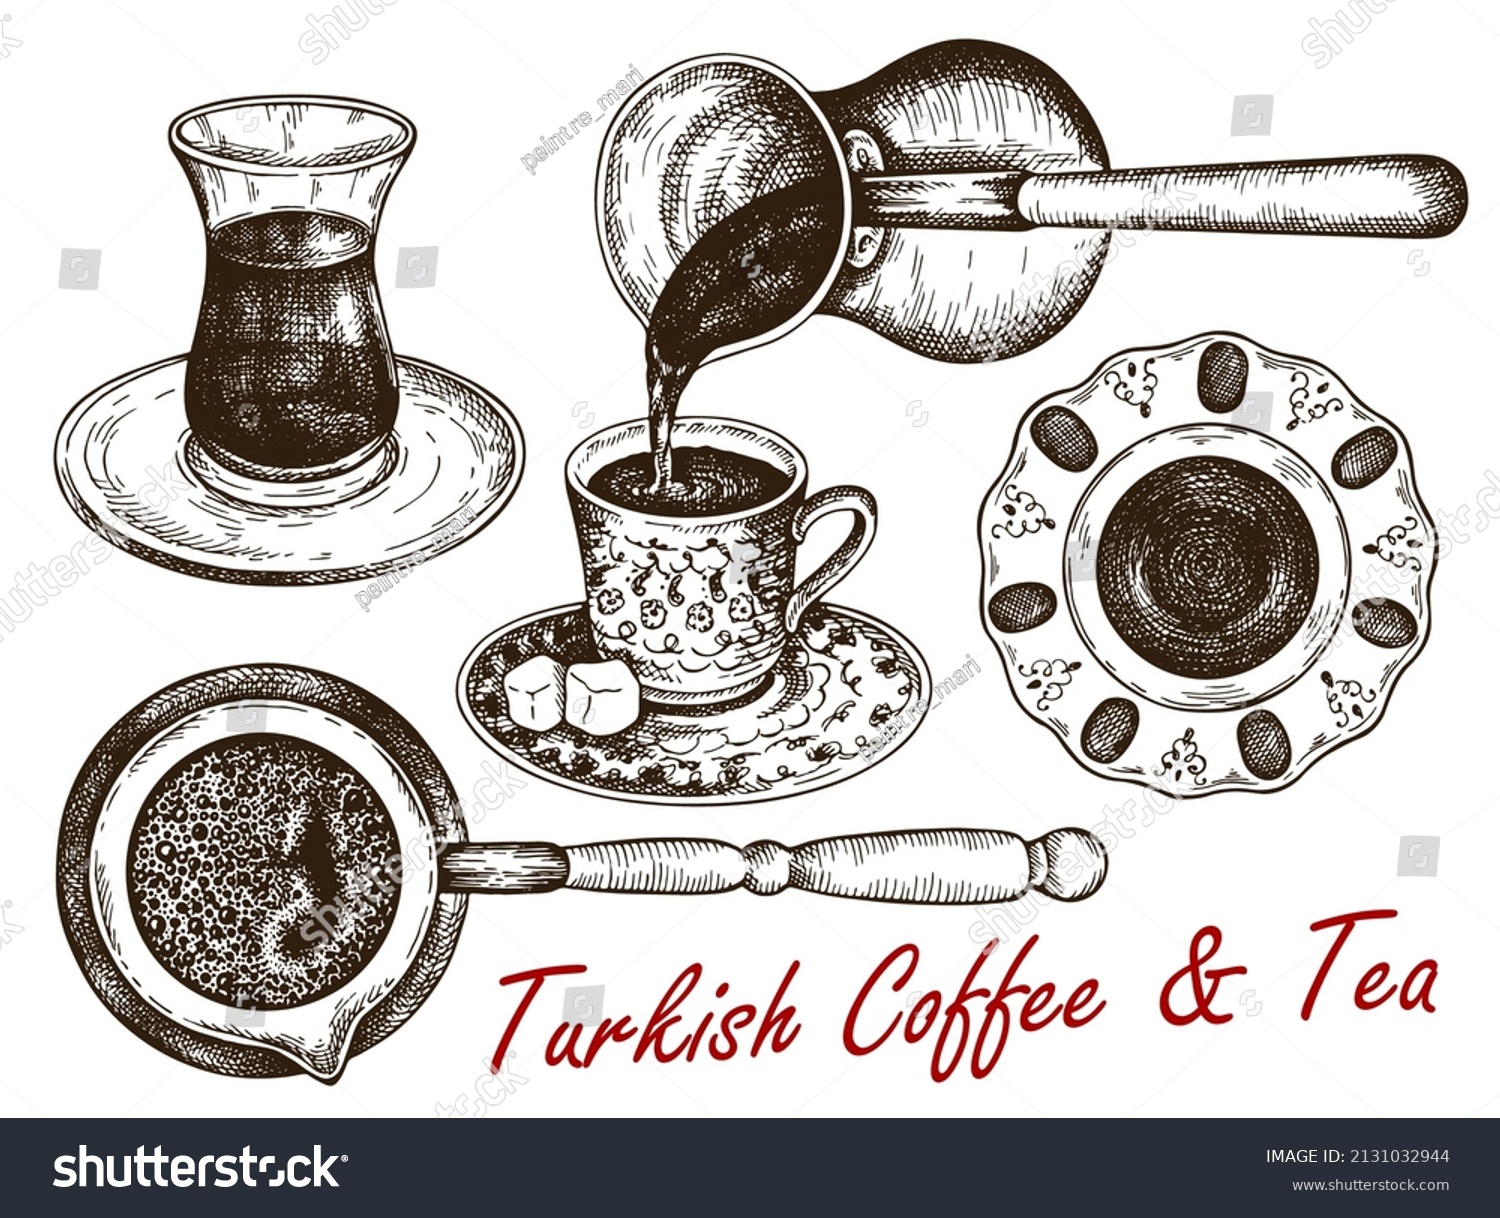 SVG of Sketch drawing set of Turkish tea and coffee in glass cup isolated on white background. Engraved drawing traditional Turkish hot drink, turk cup of coffee, turkish delight. Vintage vector illustration svg